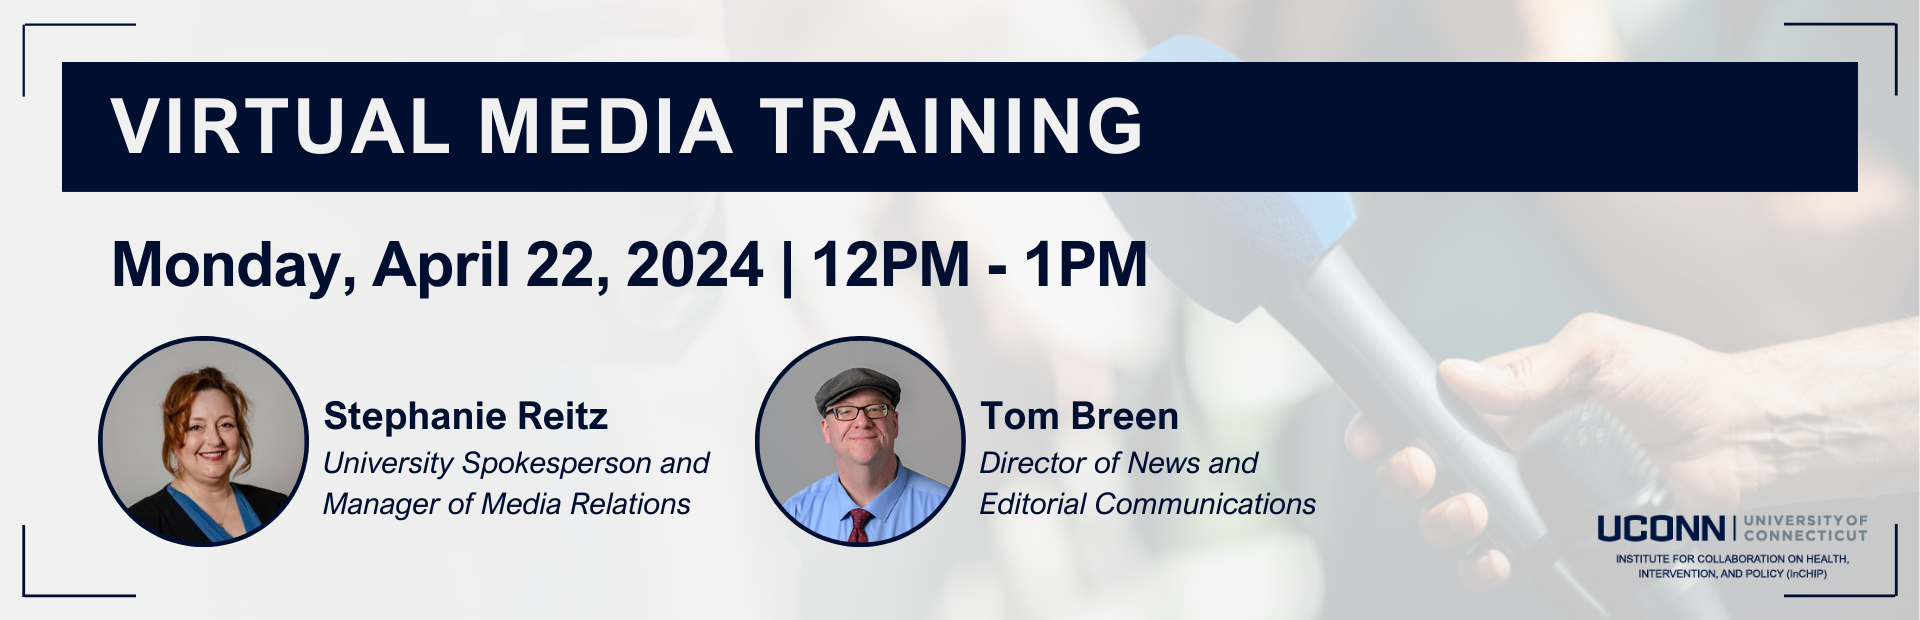 White text against a dark blue square reads "InCHIP Virtual Media Training." Under is the text "Monday, April 22 | 12PM - 1PM". Underneath is an image of Stephanie Reitz, University Spokesperson and Manager of Media Relations, and Tom Breen, Director of News and Editorial Communications.